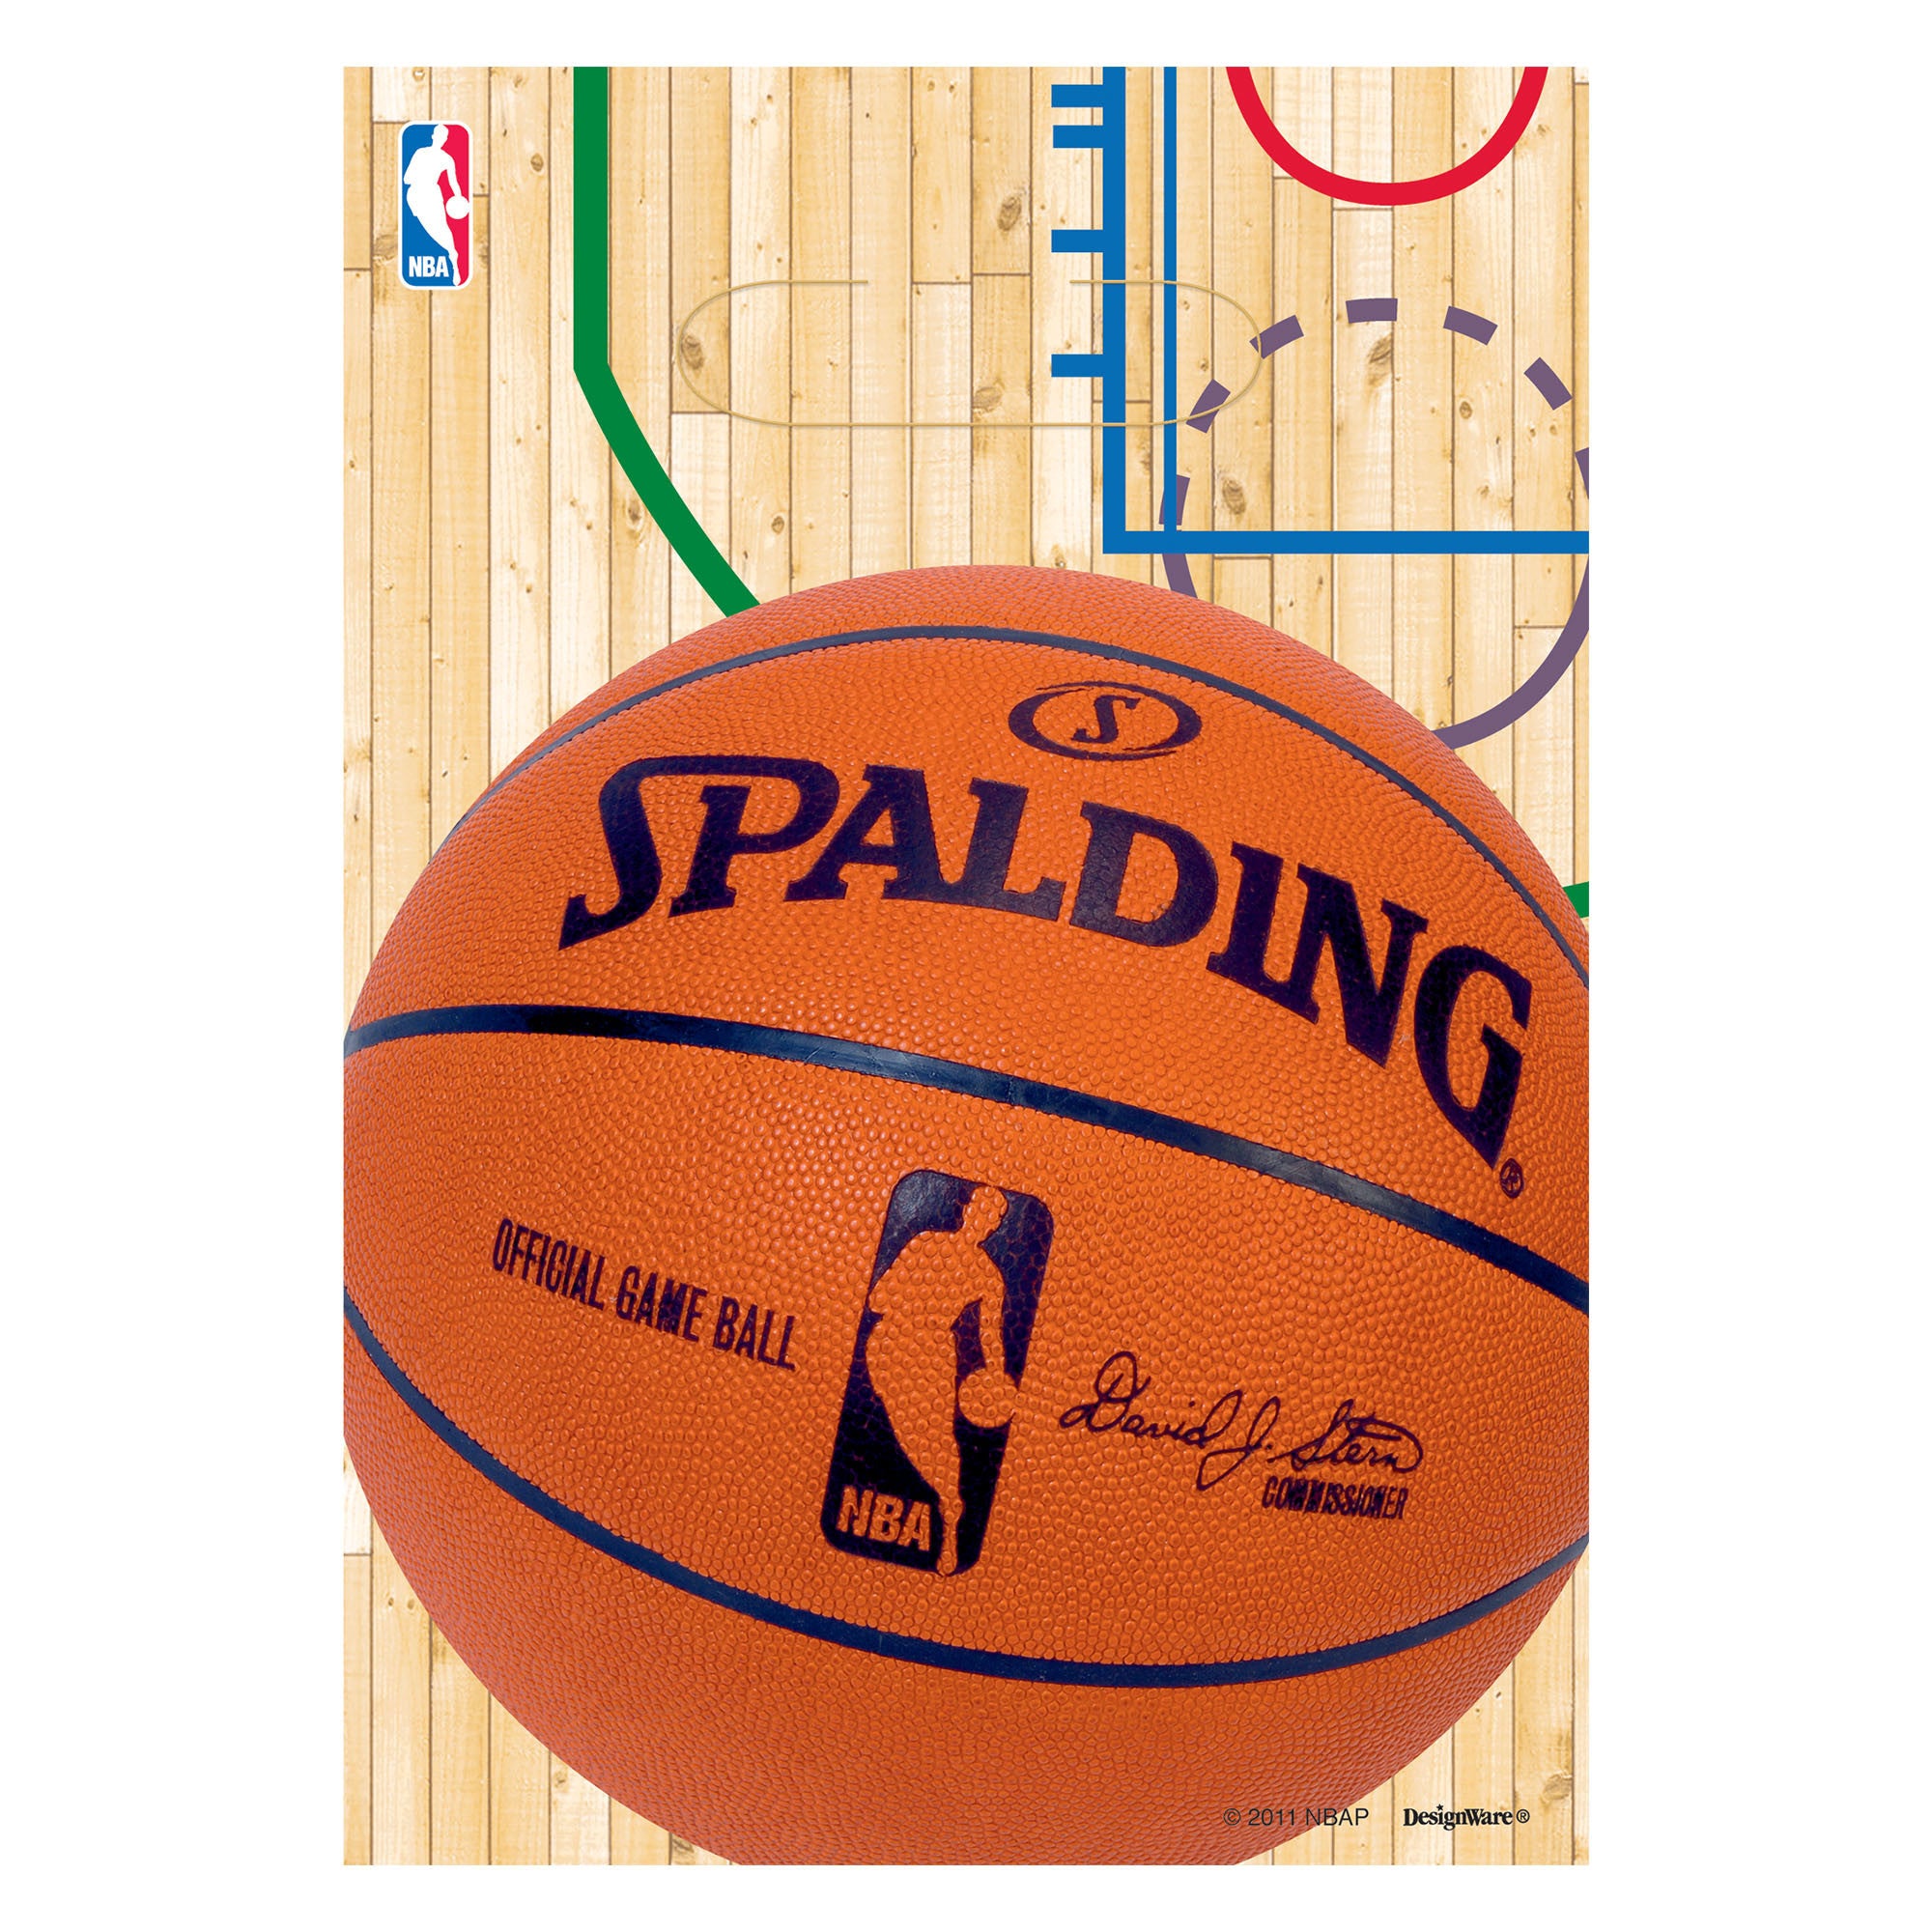 NBA drops Spalding as maker of official basketball after more than 30 years